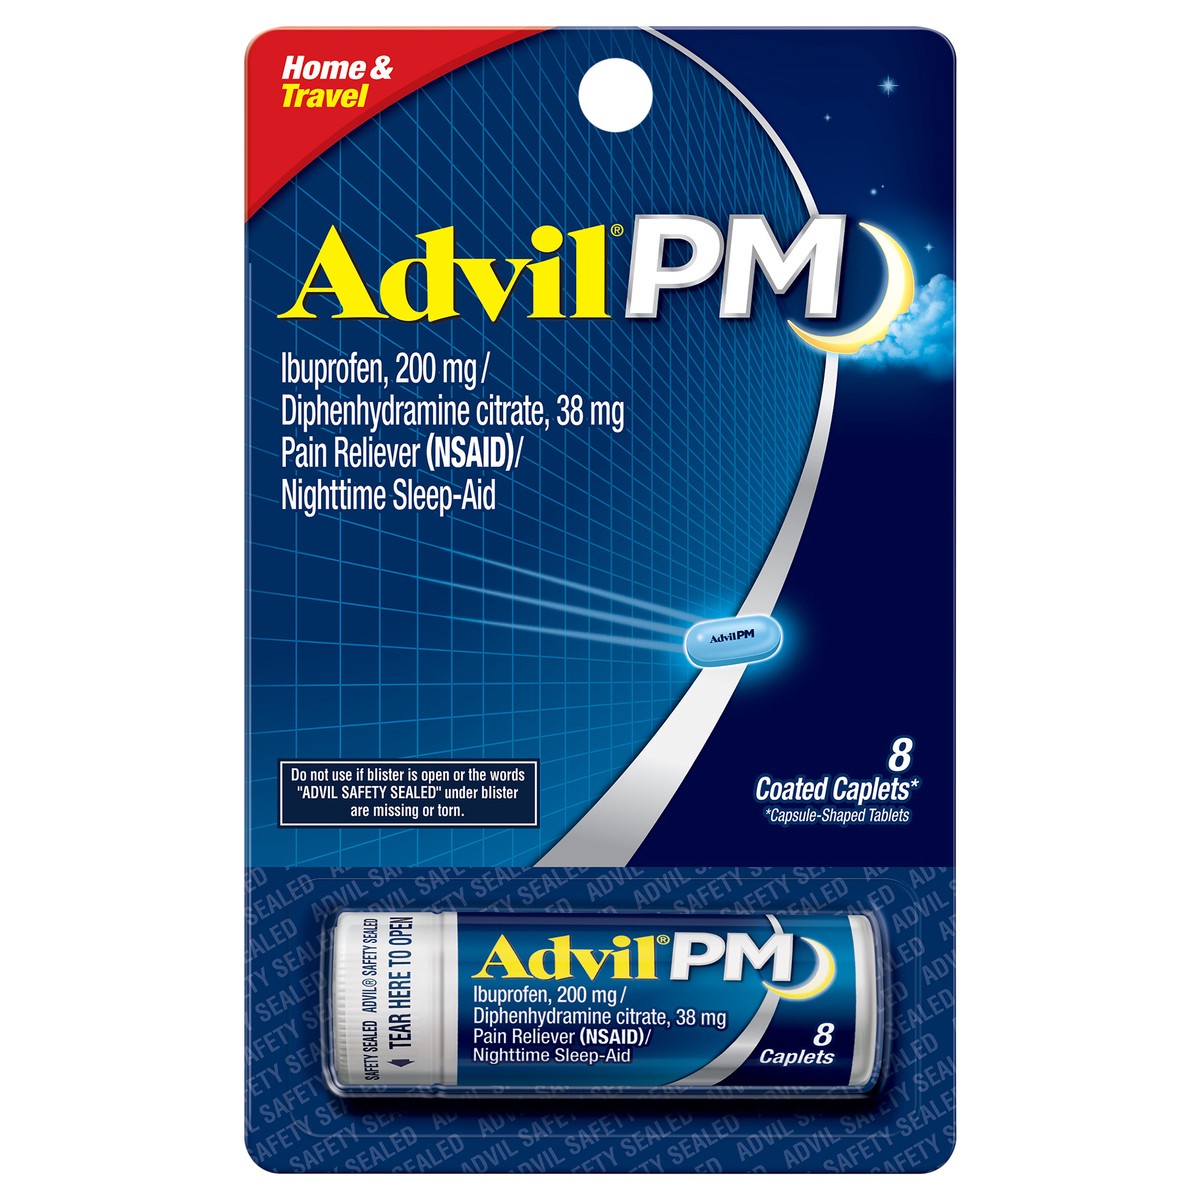 slide 1 of 2, Advil PM Pain Reliever and Nighttime Sleep Aid, Ibuprofen for Pain Relief and Diphenhydramine Citrate for a Sleep Aid - 8 Coated Caplets, 8 ct